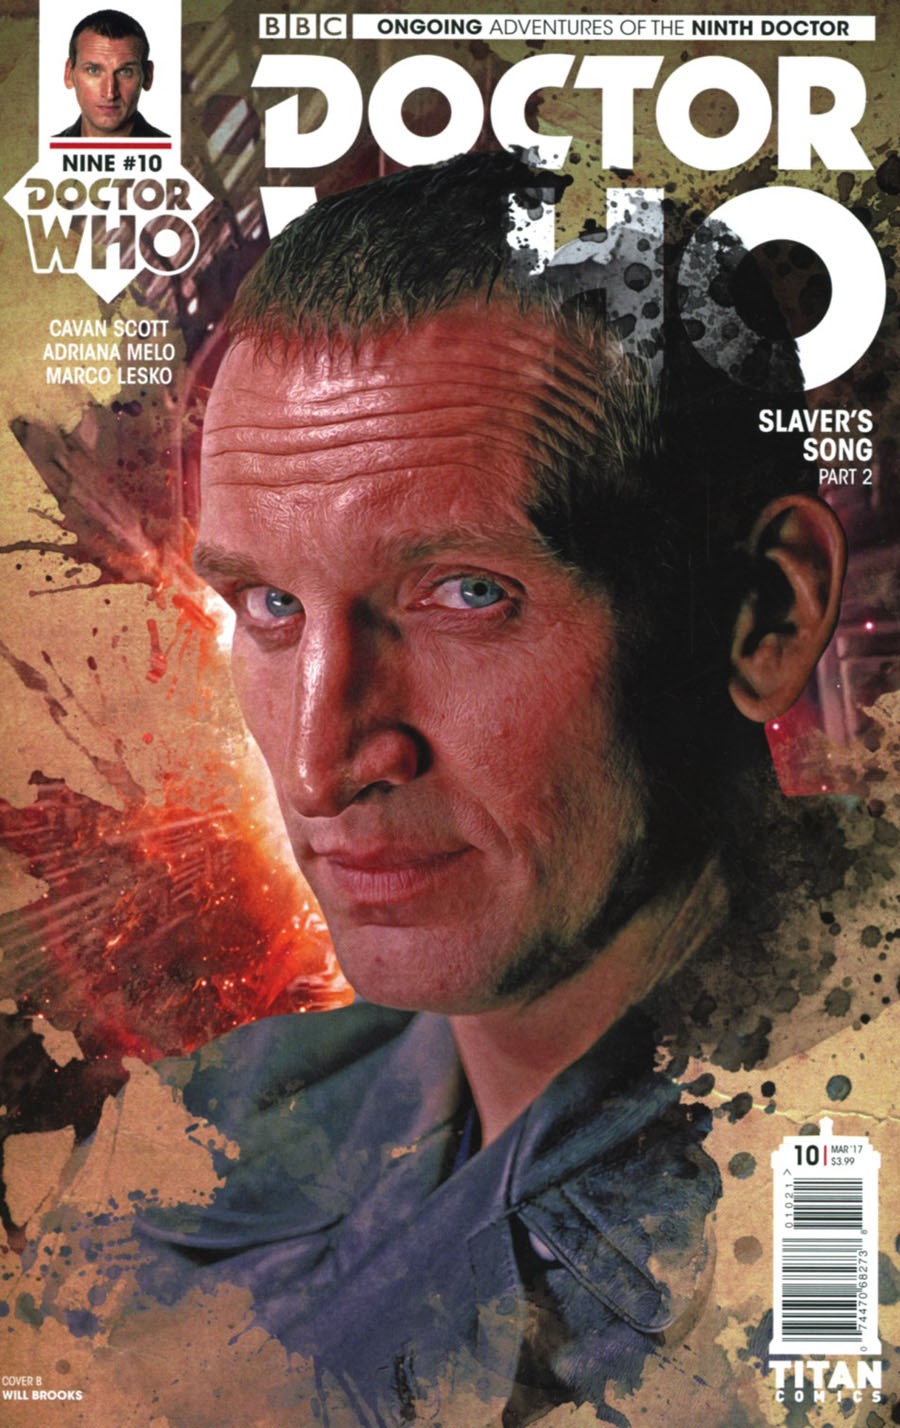 Doctor Who 9th Doctor Vol 2 #10 Cover B Variant Photo Cover